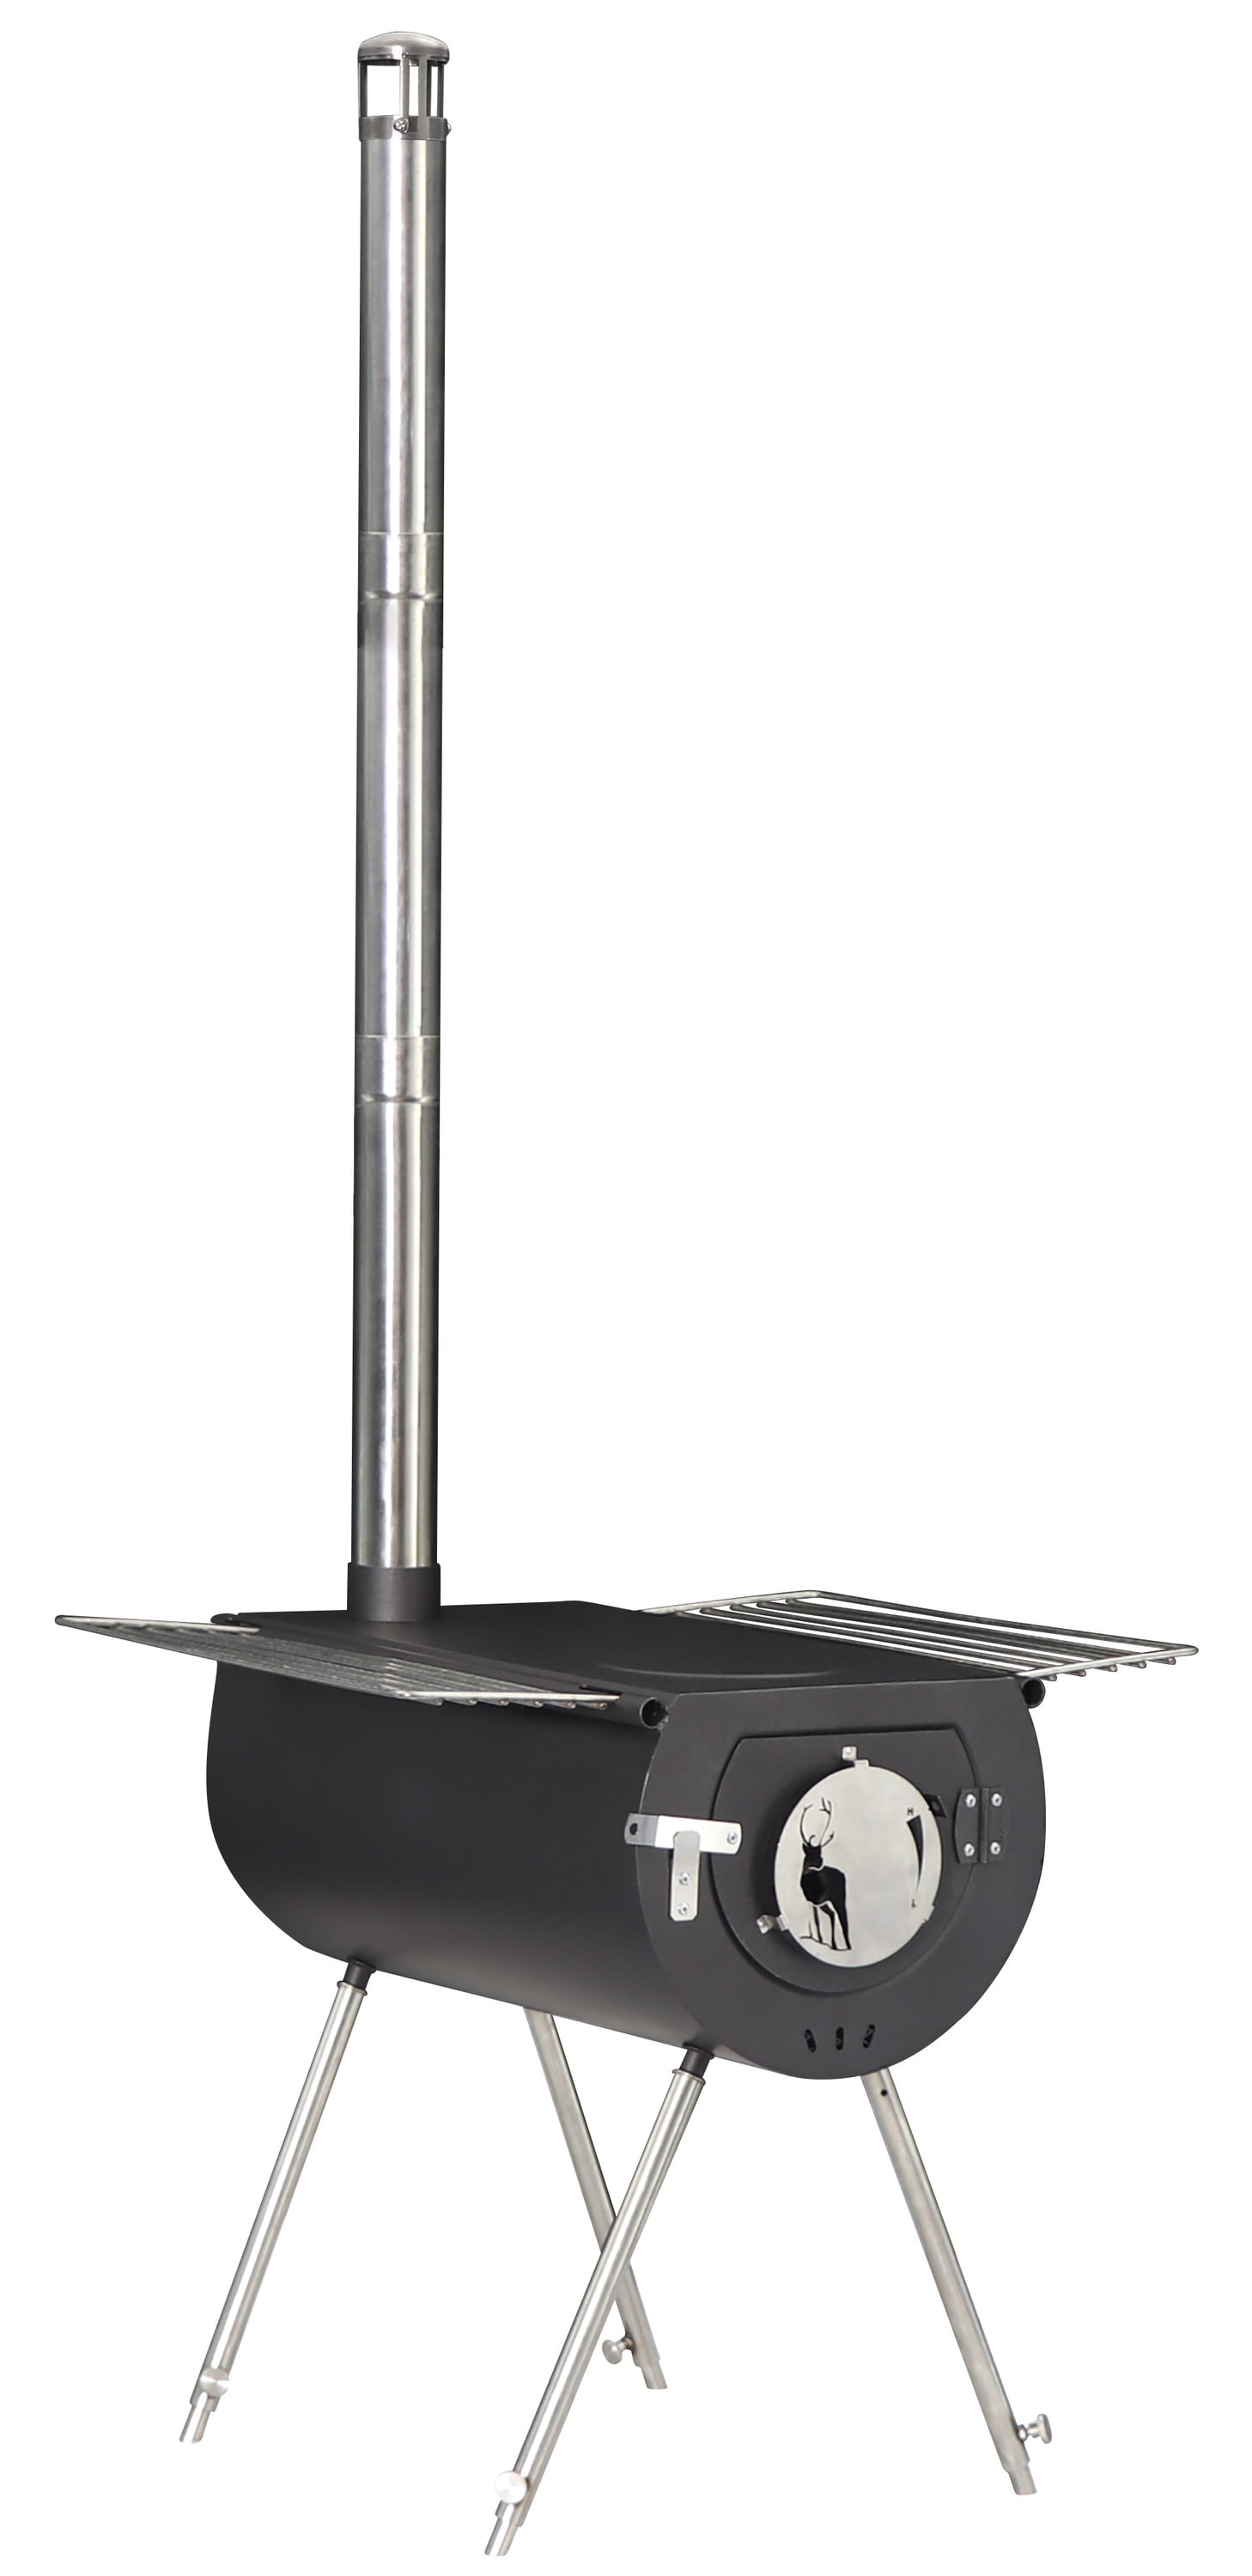 Wood Outdoor Burners & Stoves at Lowes.com